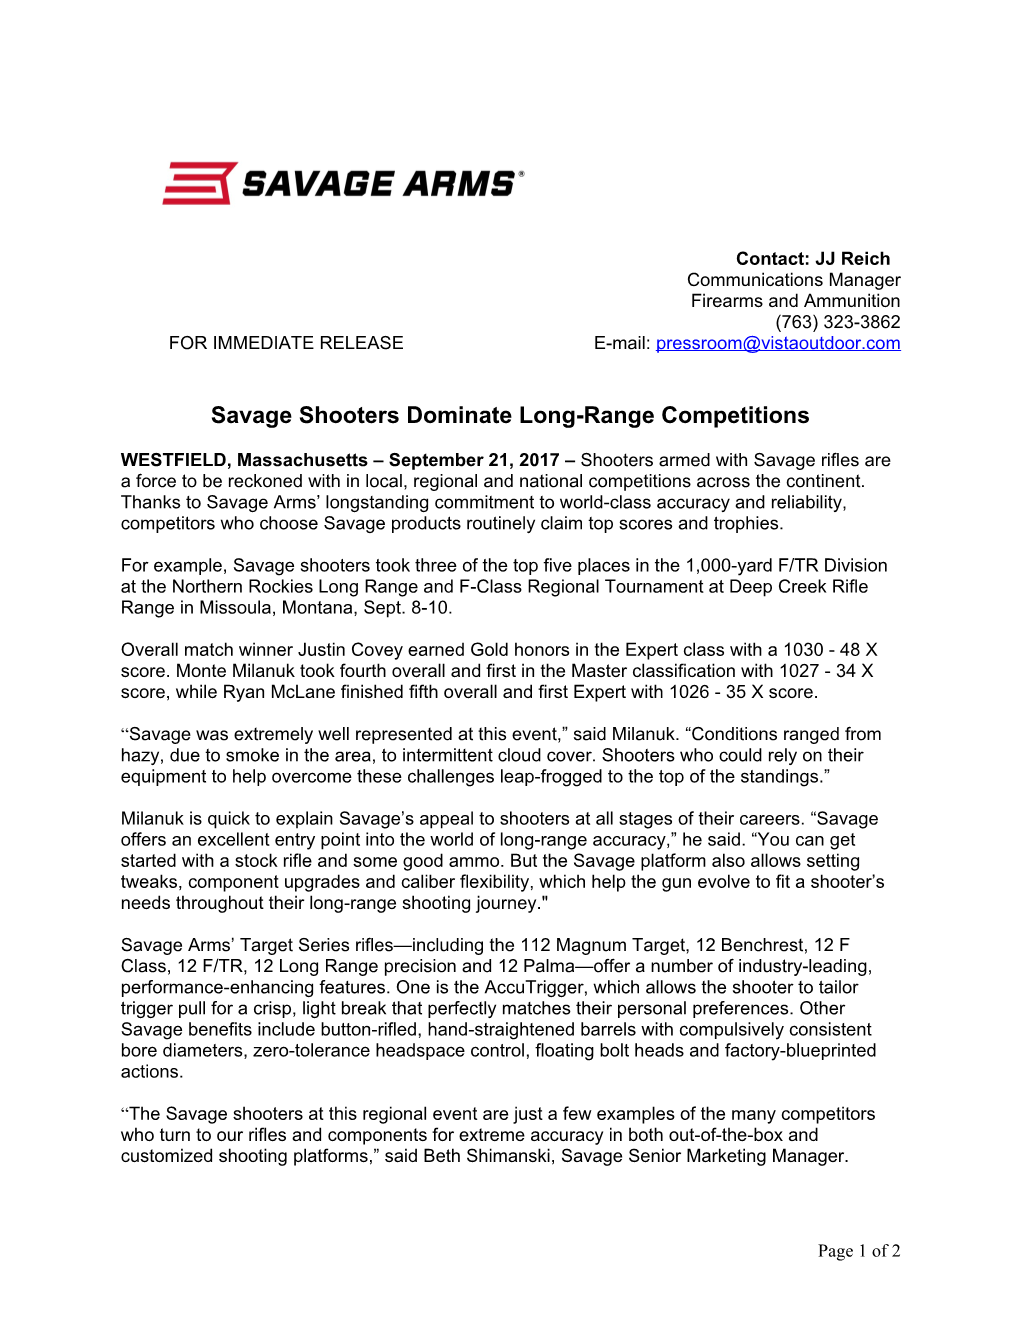 Savage Shooters Dominate Long-Range Competitions